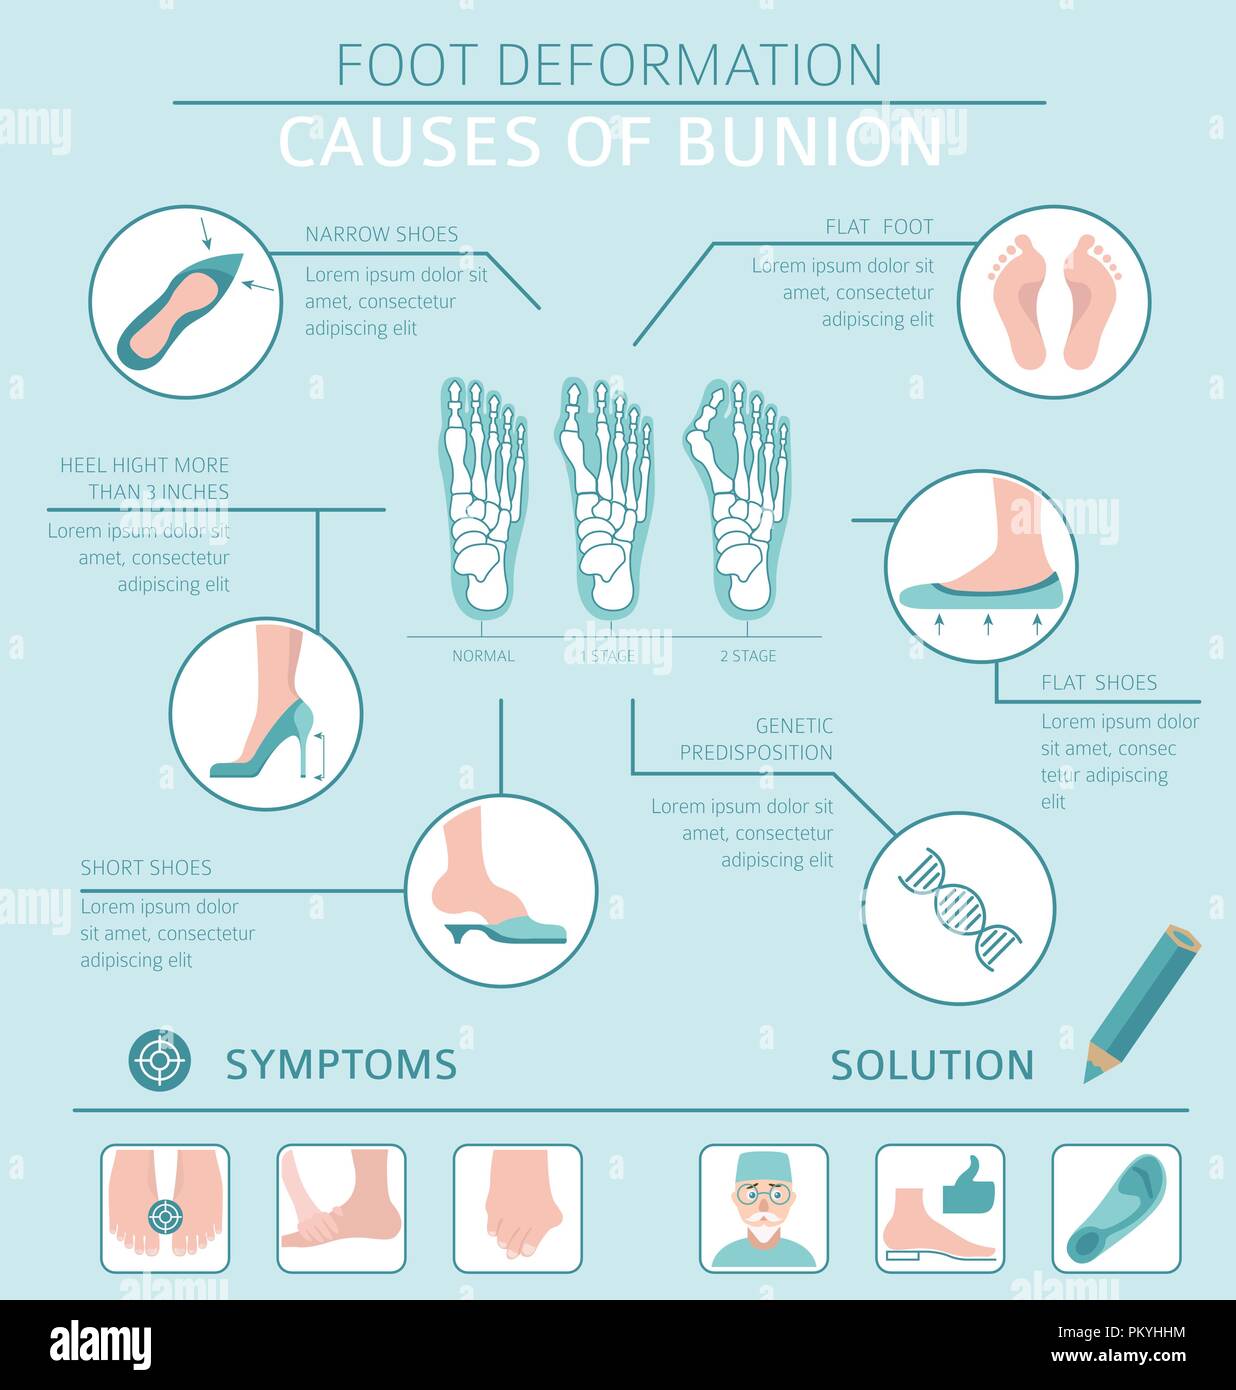 Foot deformation as medical desease infographic. Causes of bunion. Vector illustration Stock Vector